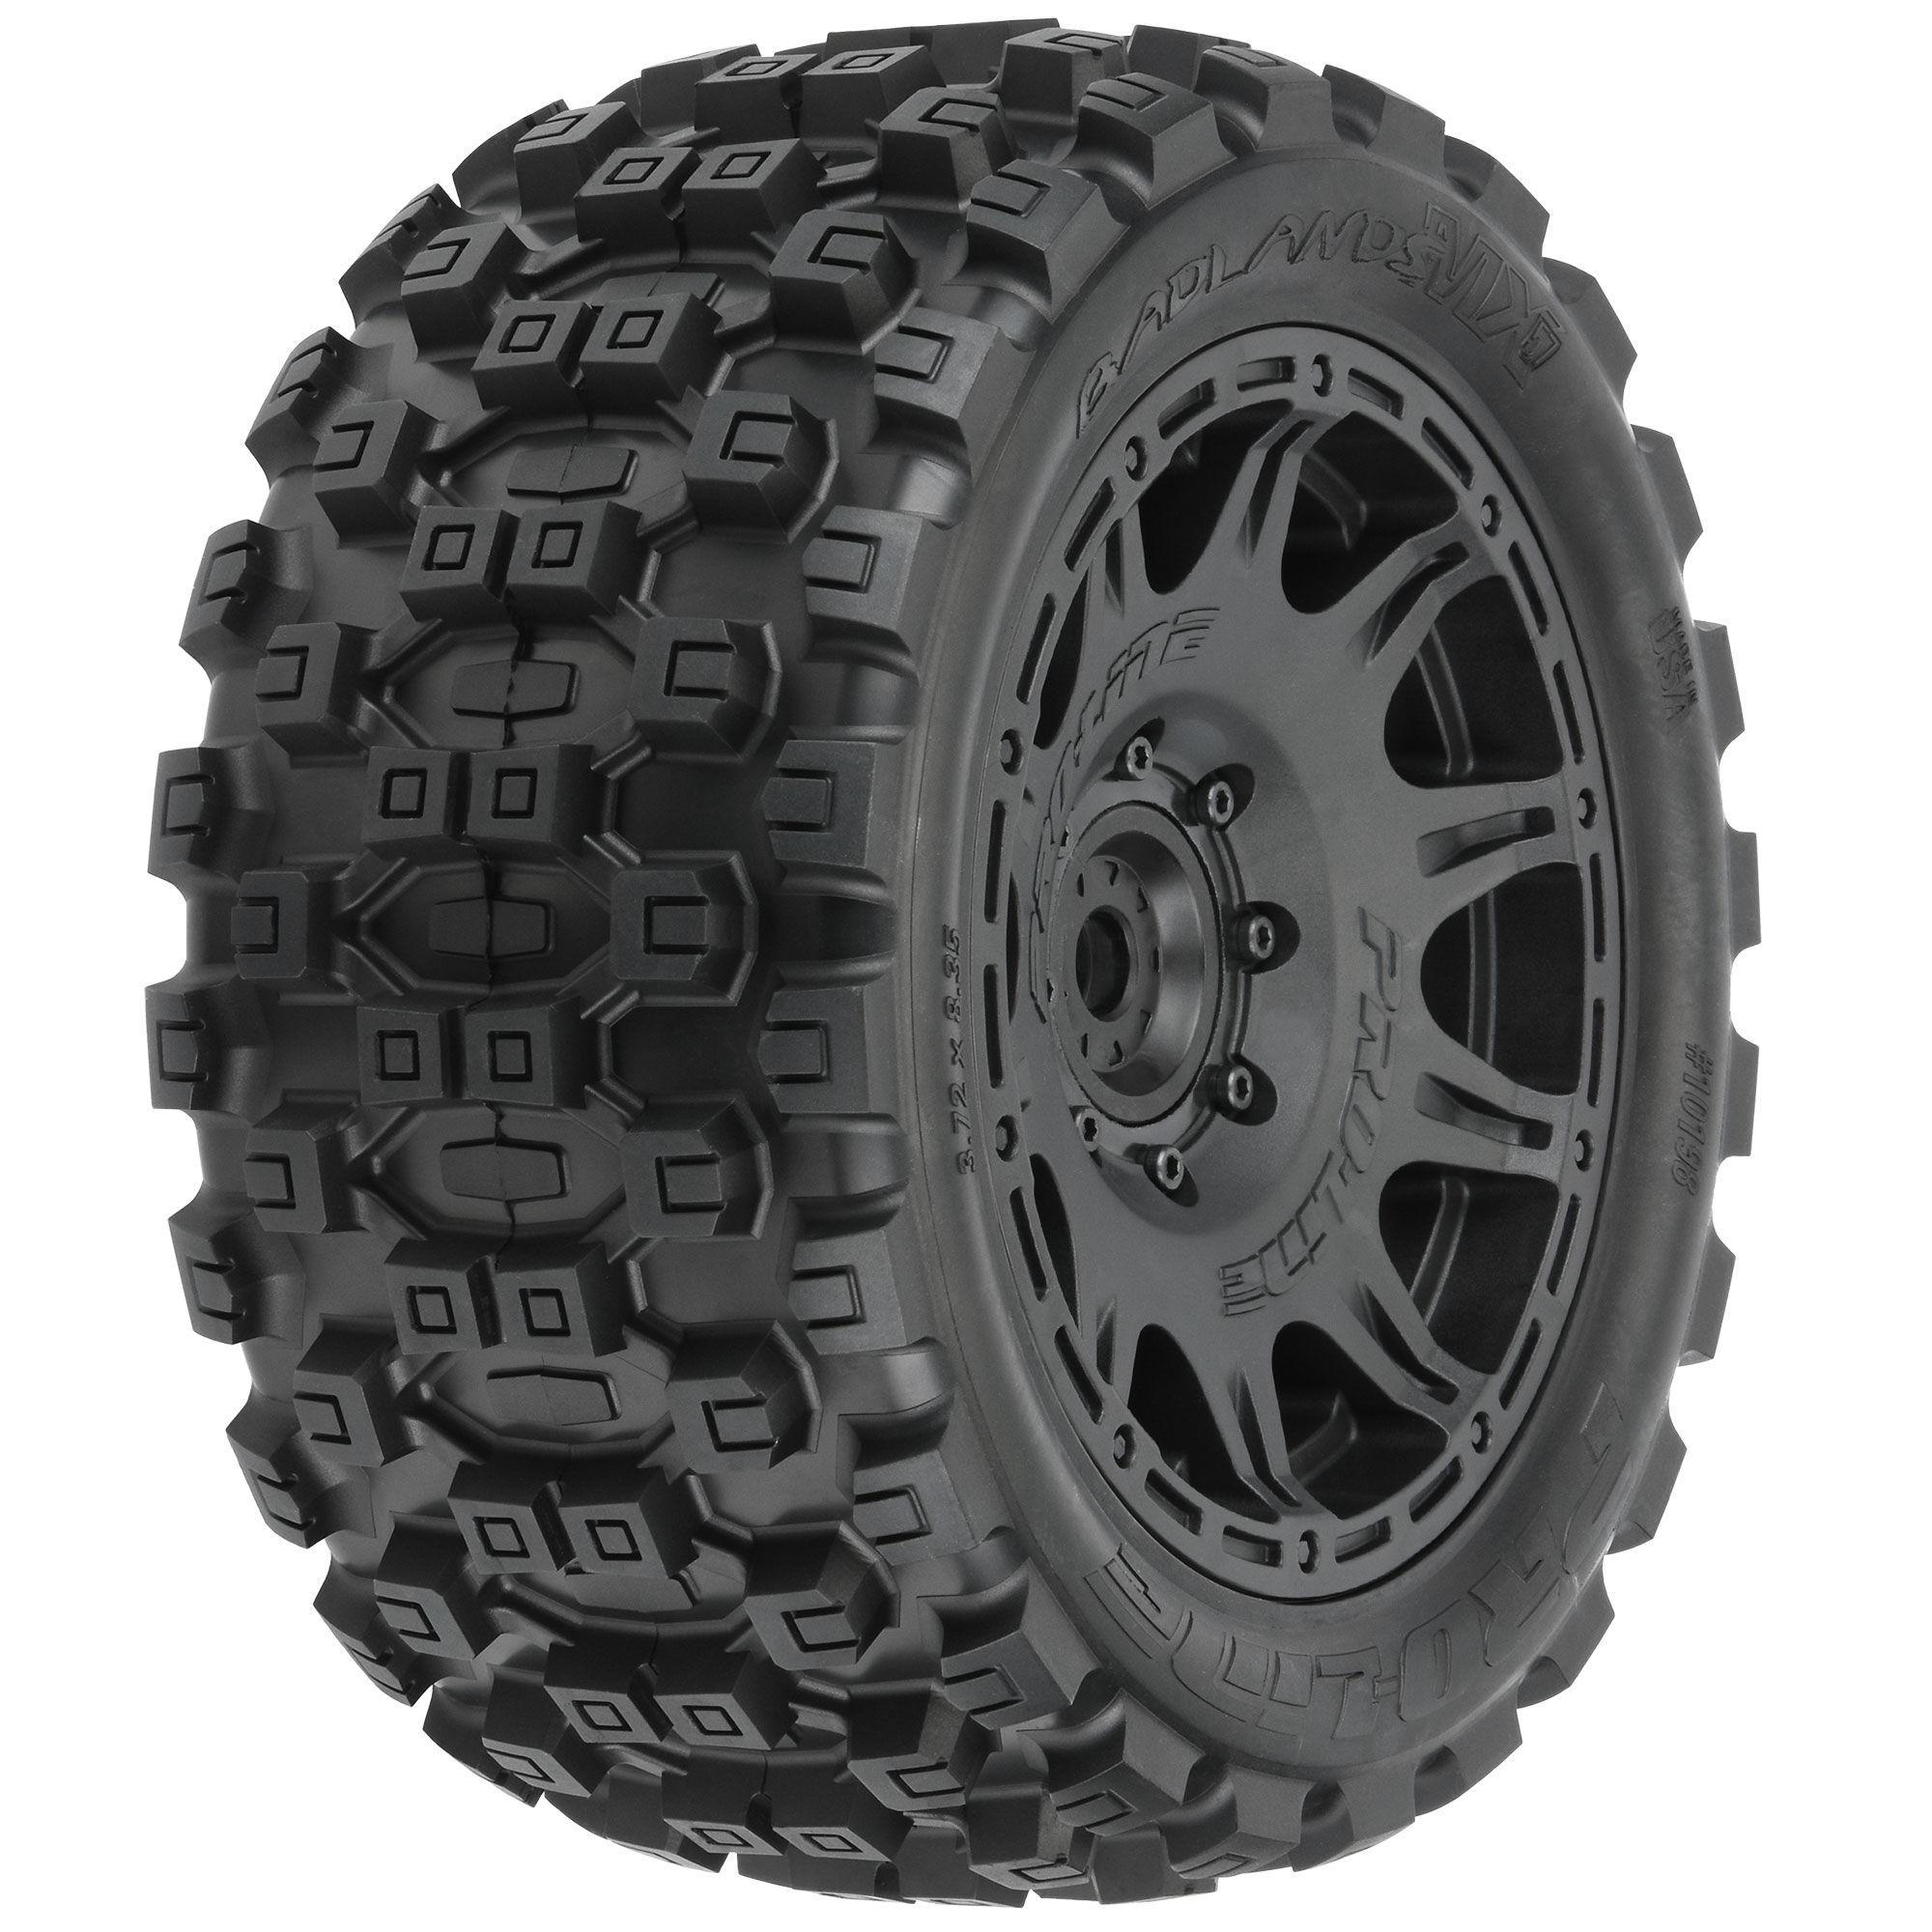 1/6 Badlands MX57 5.7” Tires Mounted on Raid 8x48 Removable 24mm Hex Wheels